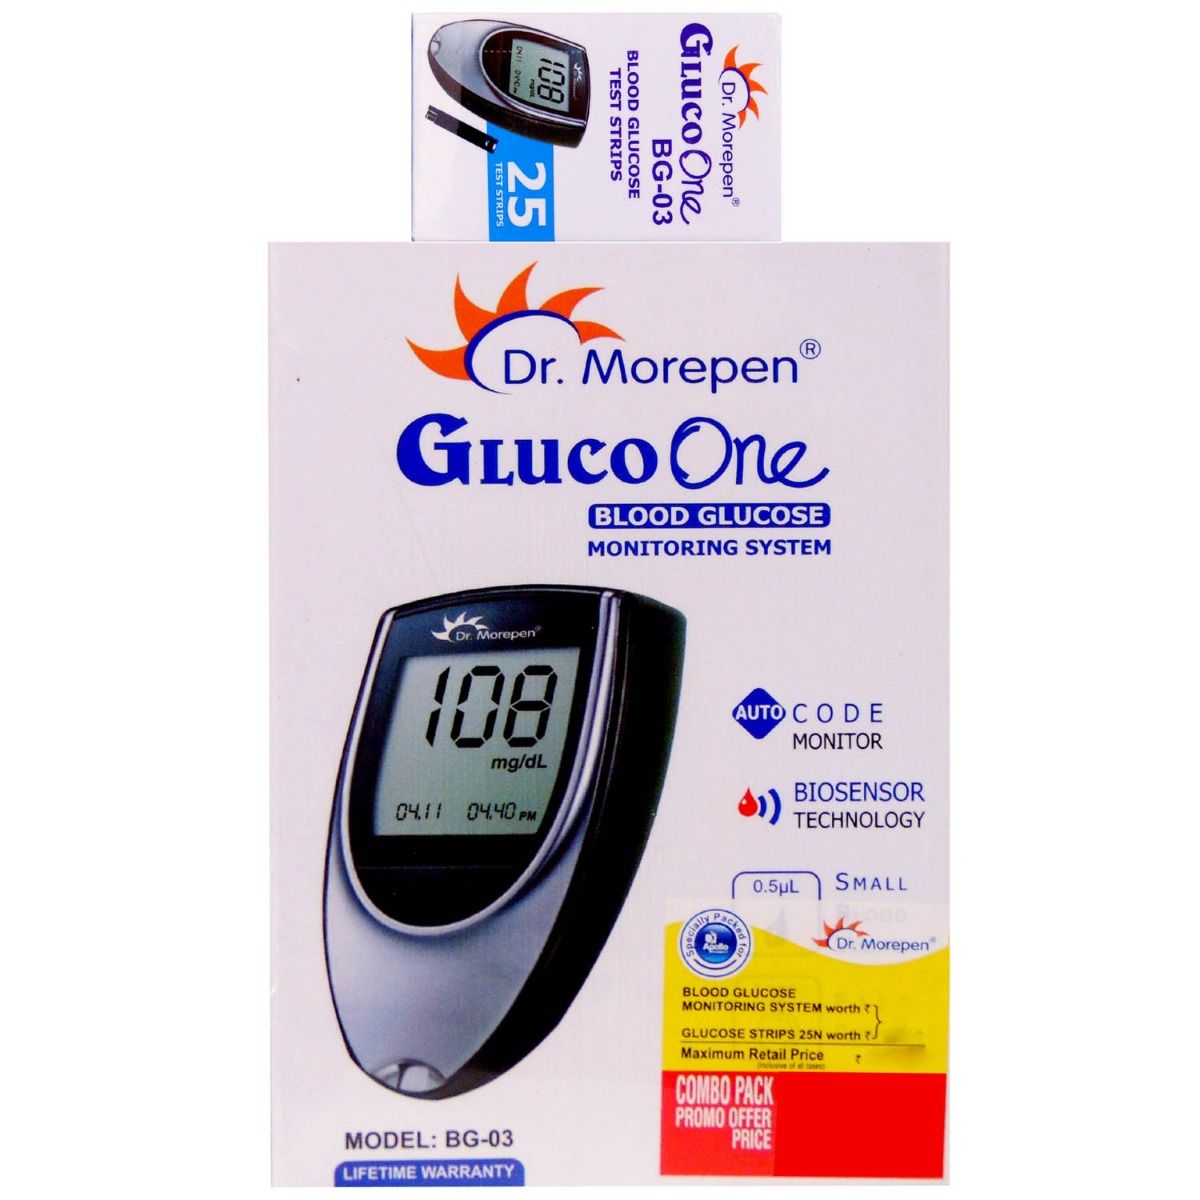 Dr. Morepen Gluco One Blood Glucose Monitoring System BG-03, With 25 Free Test Strips, 1 kit, Pack of 1 